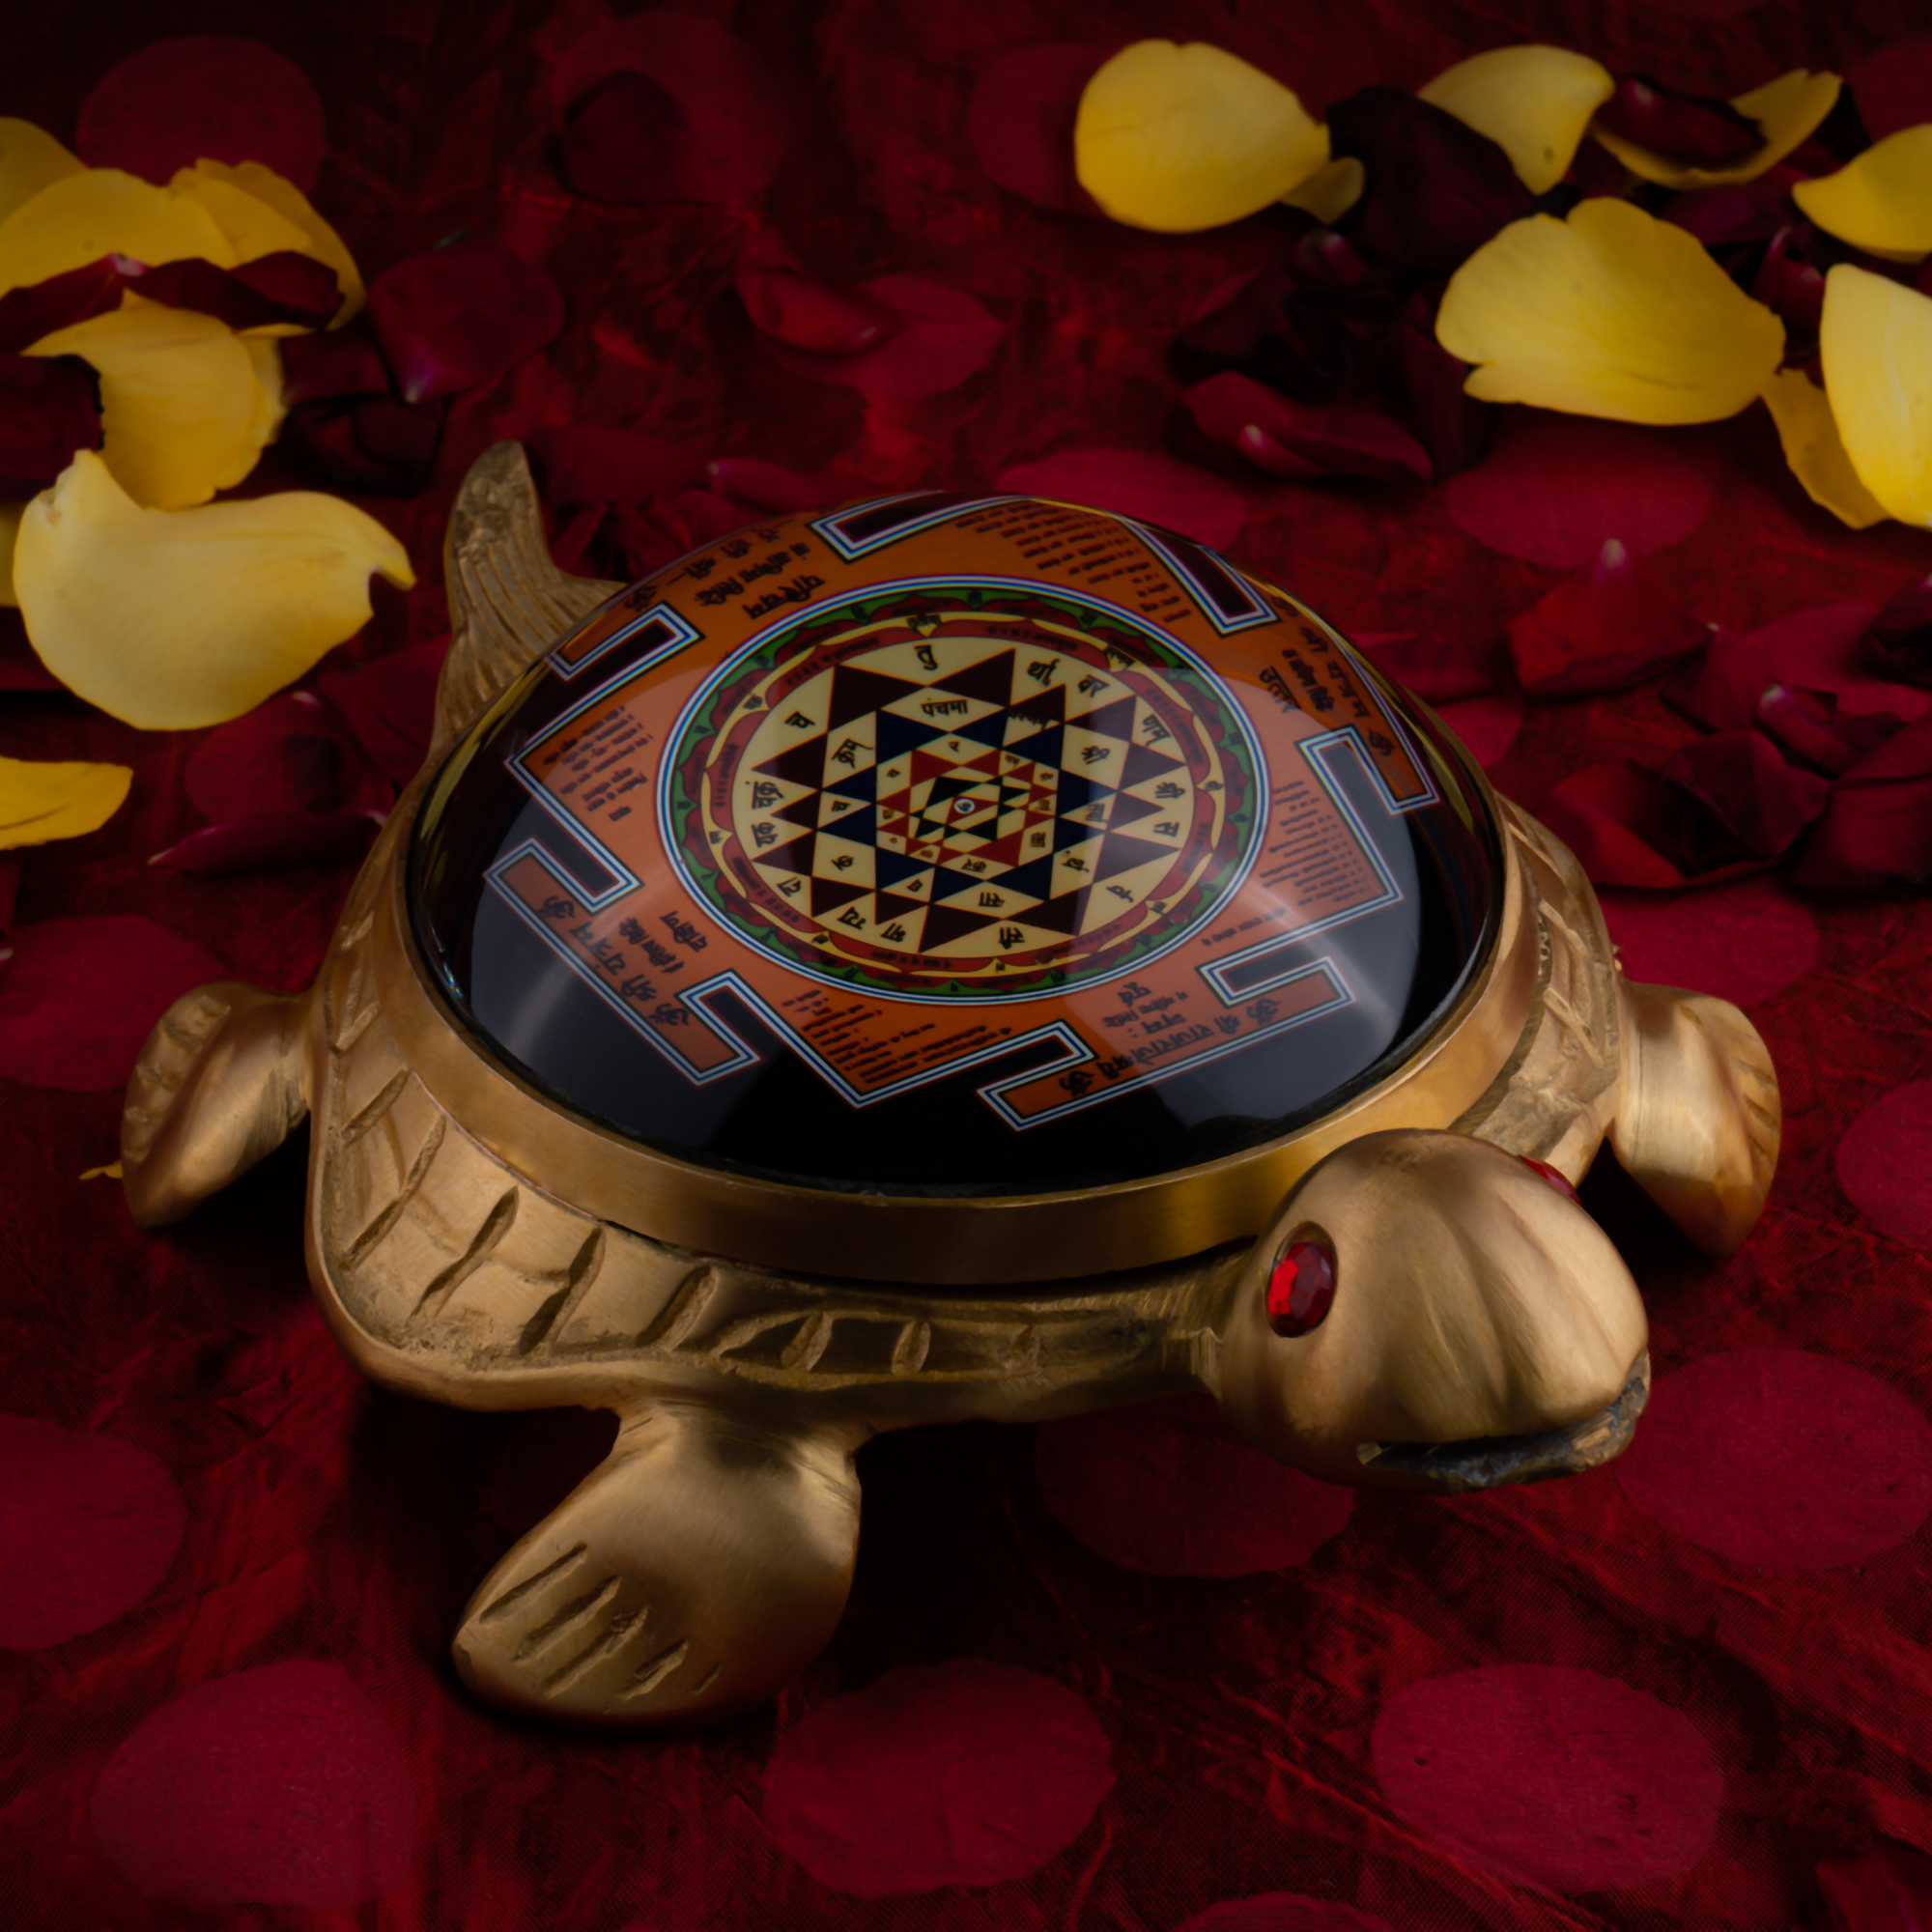 Meru Shree Yantra assists in achieving mental calm and stability